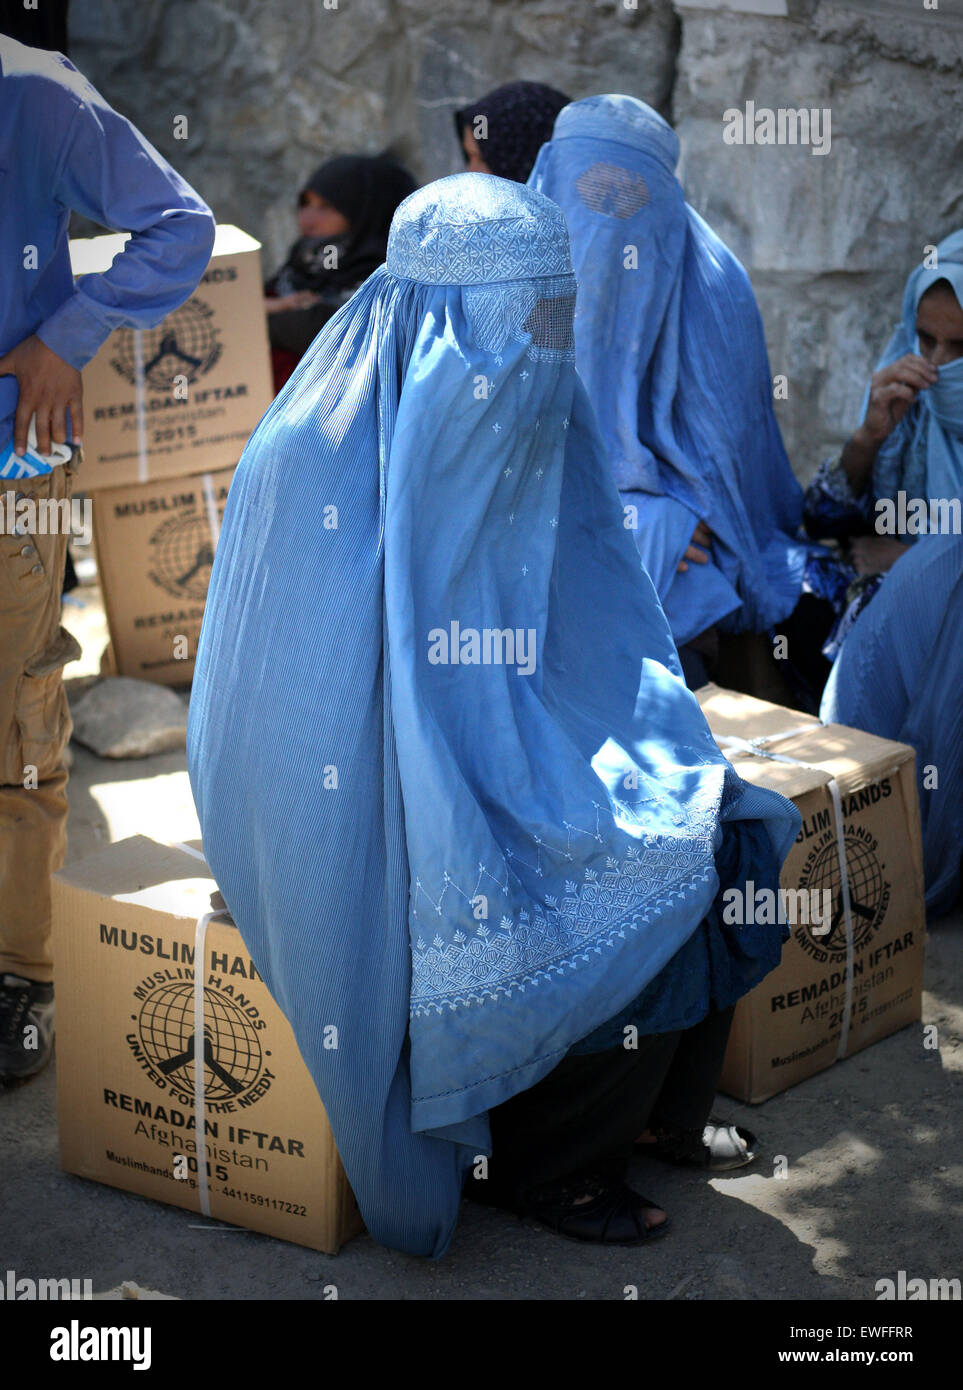 (150625) -- KABUL, June 25, 2015 (Xinhua) -- Afghan women wait for transportation after receving food donated by Muslim Hands International organization for poor people during the holy month of Ramadan in Kabul, Afghanistan, June 25, 2015. (Xinhua/Ahmad Massoud) Stock Photo